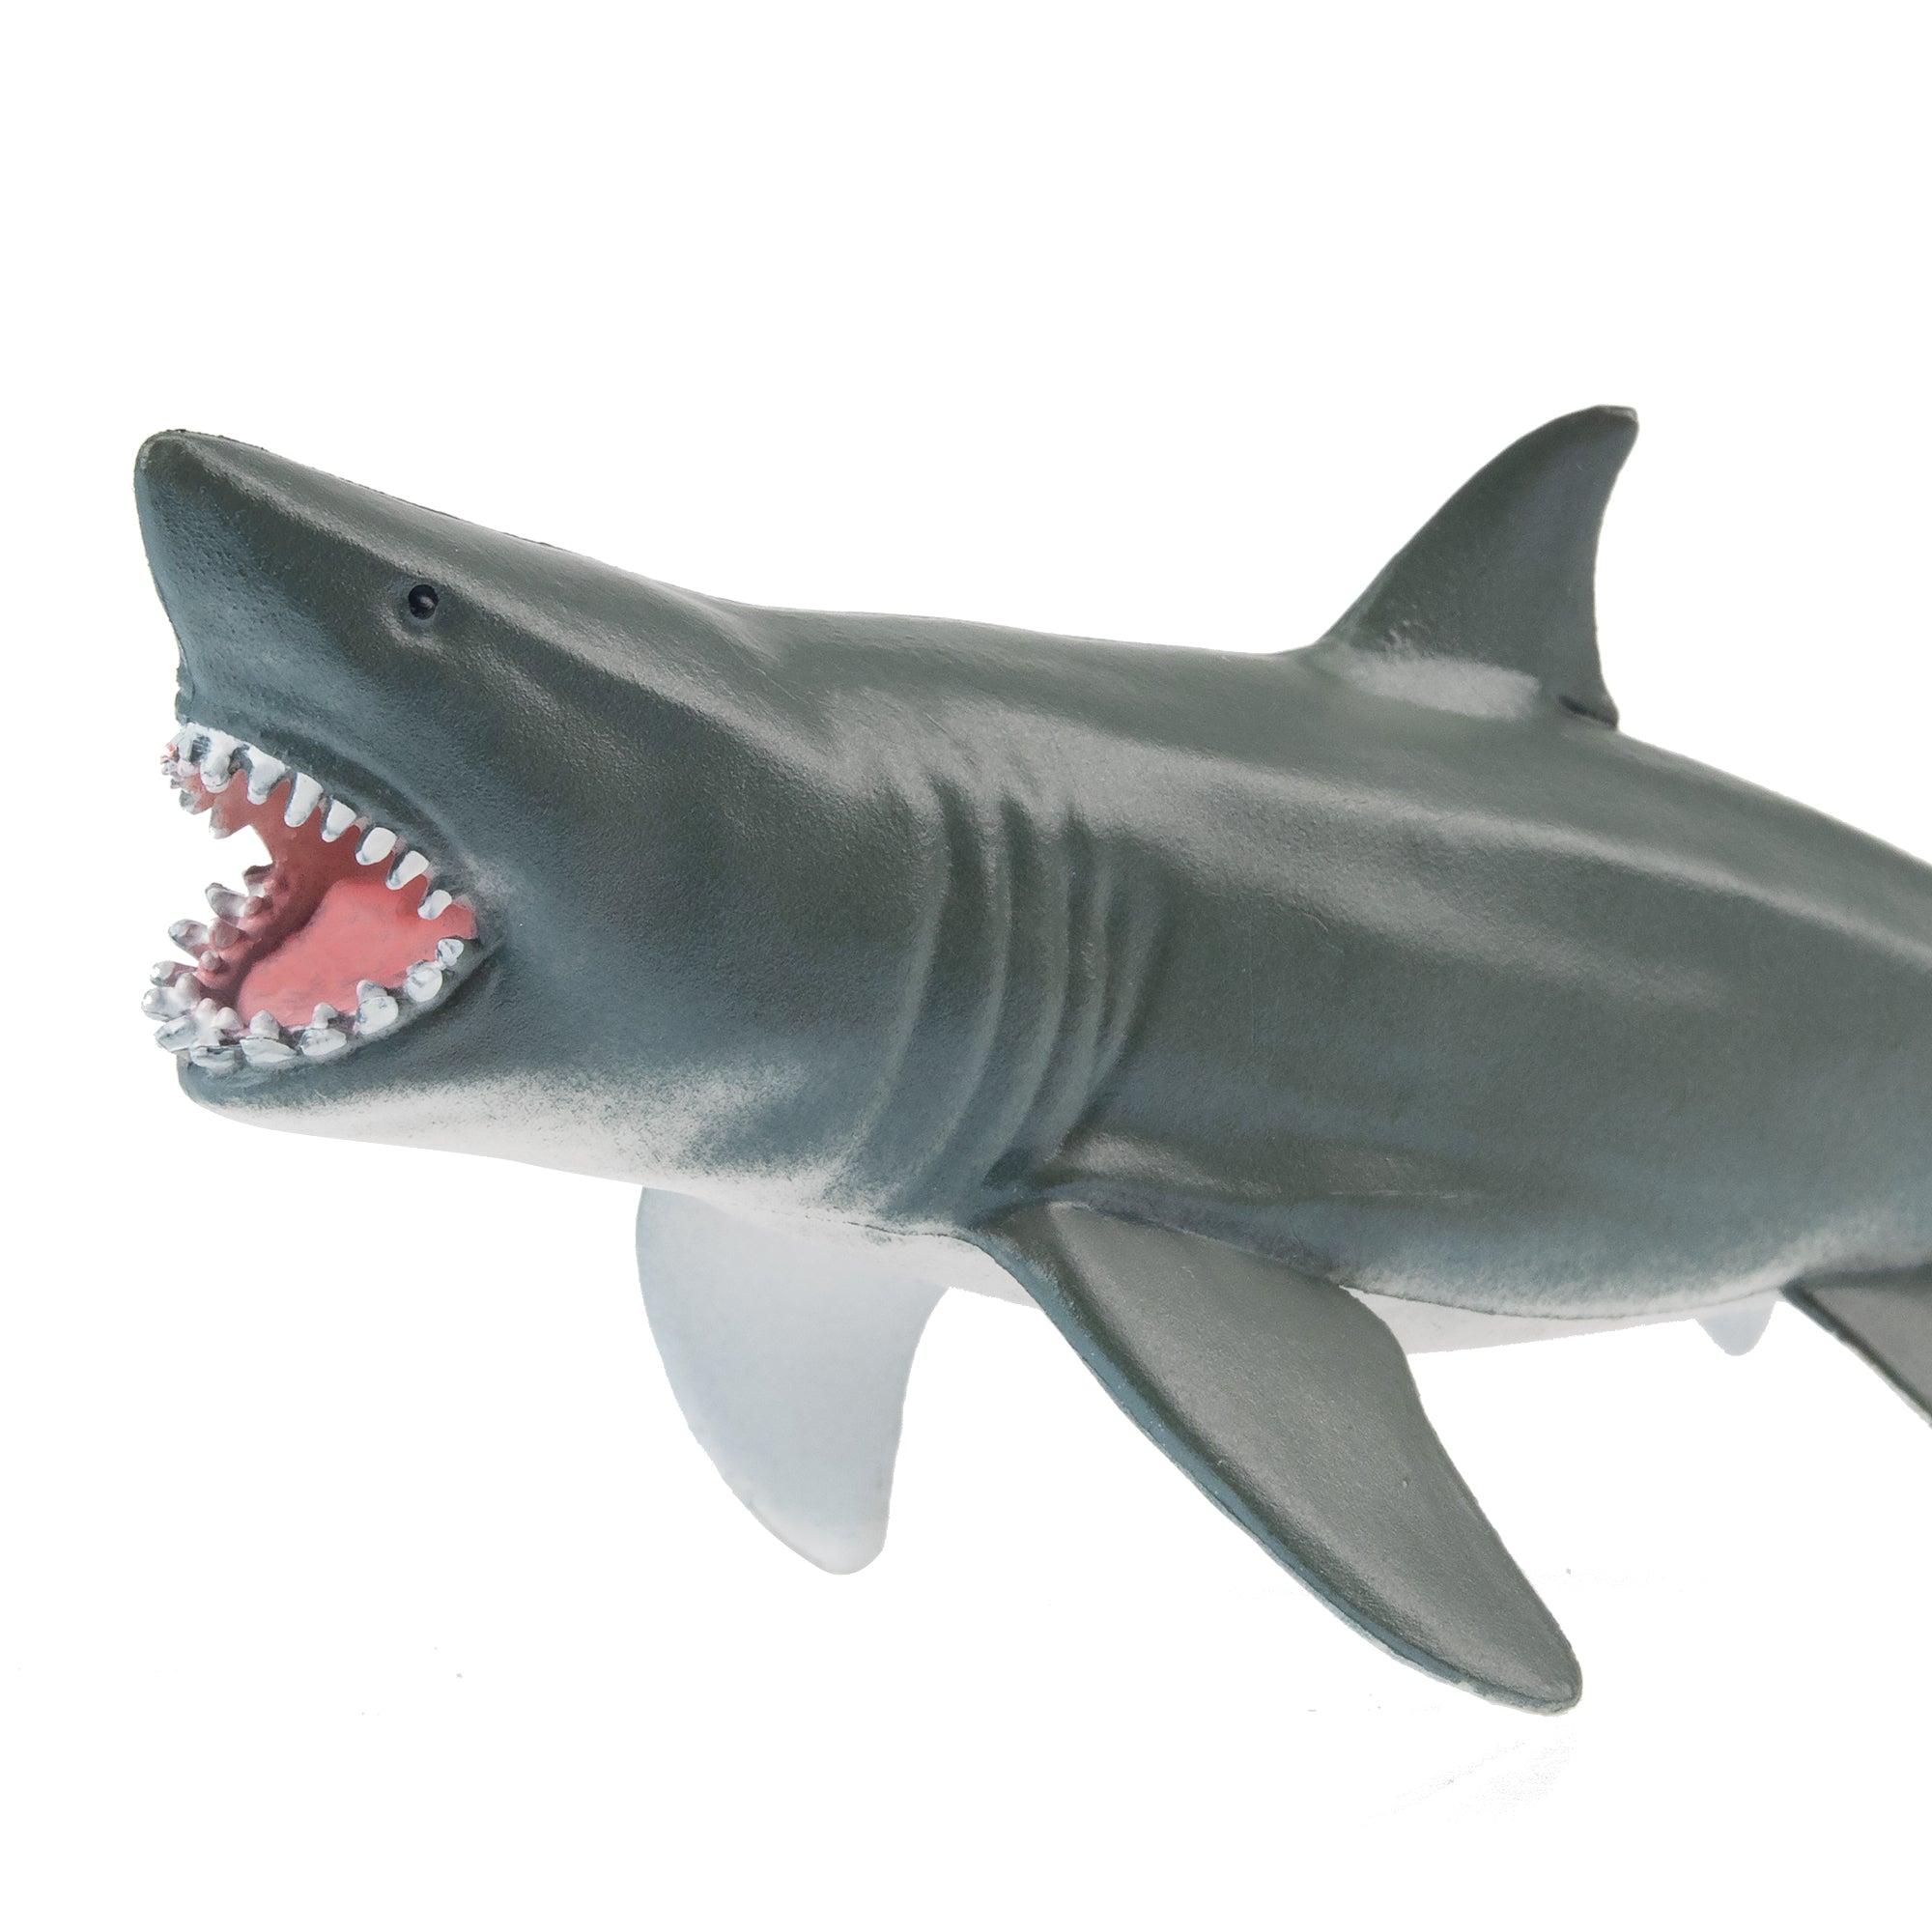 Toymany Open-Mouthed Great White Shark Figurine Toy-mouth